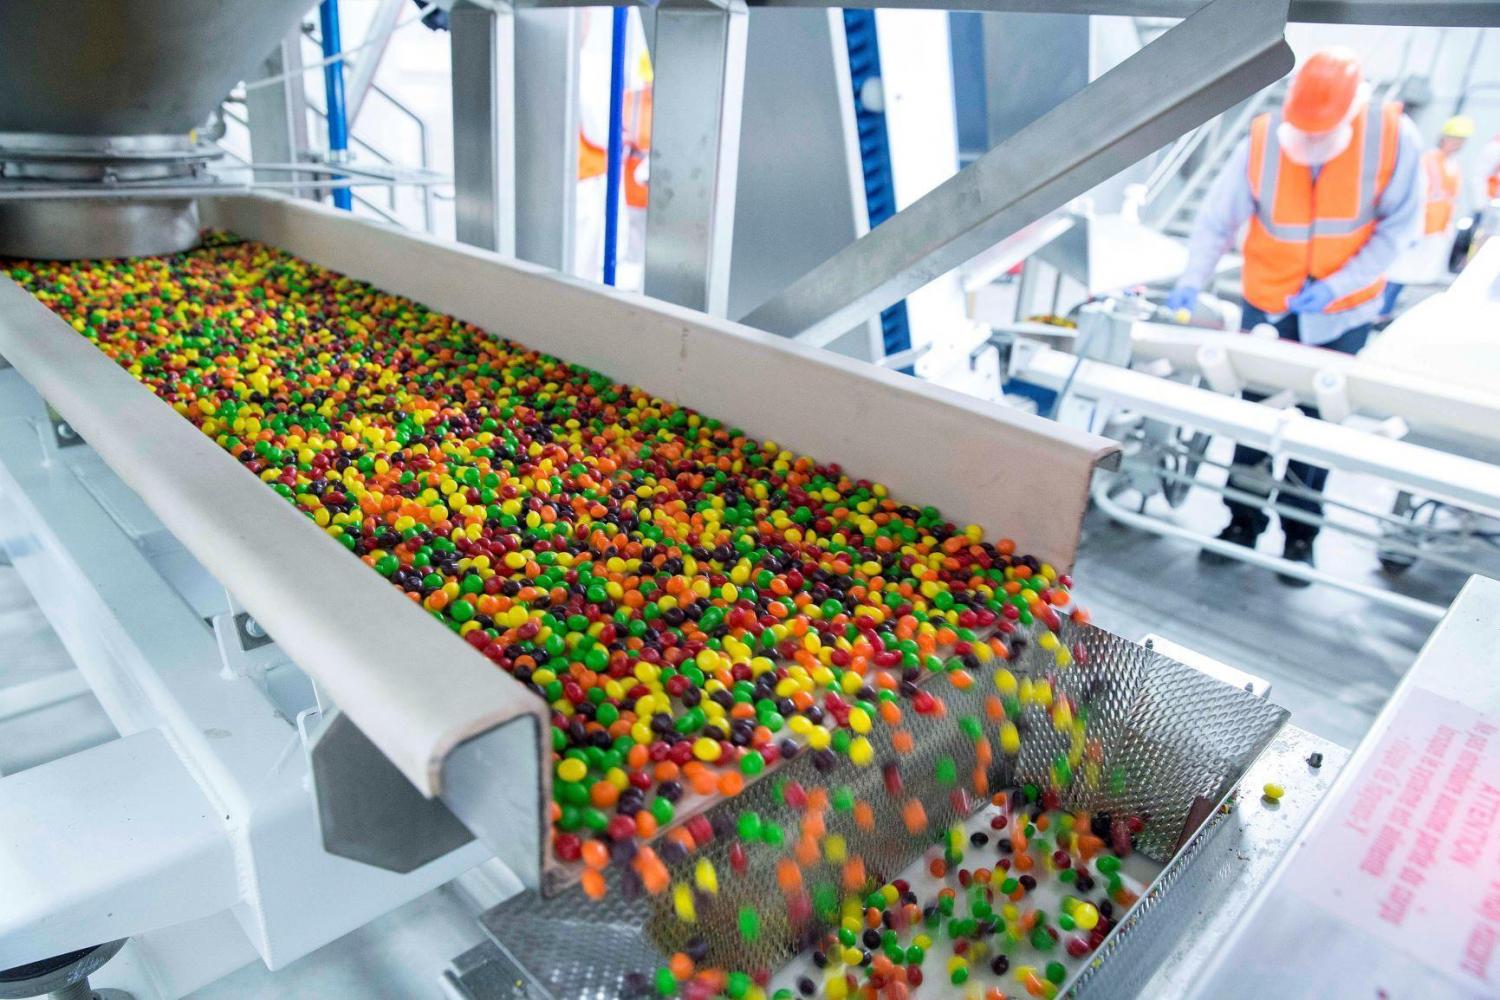 mars production facility skittles - centering purpose in the pandemic